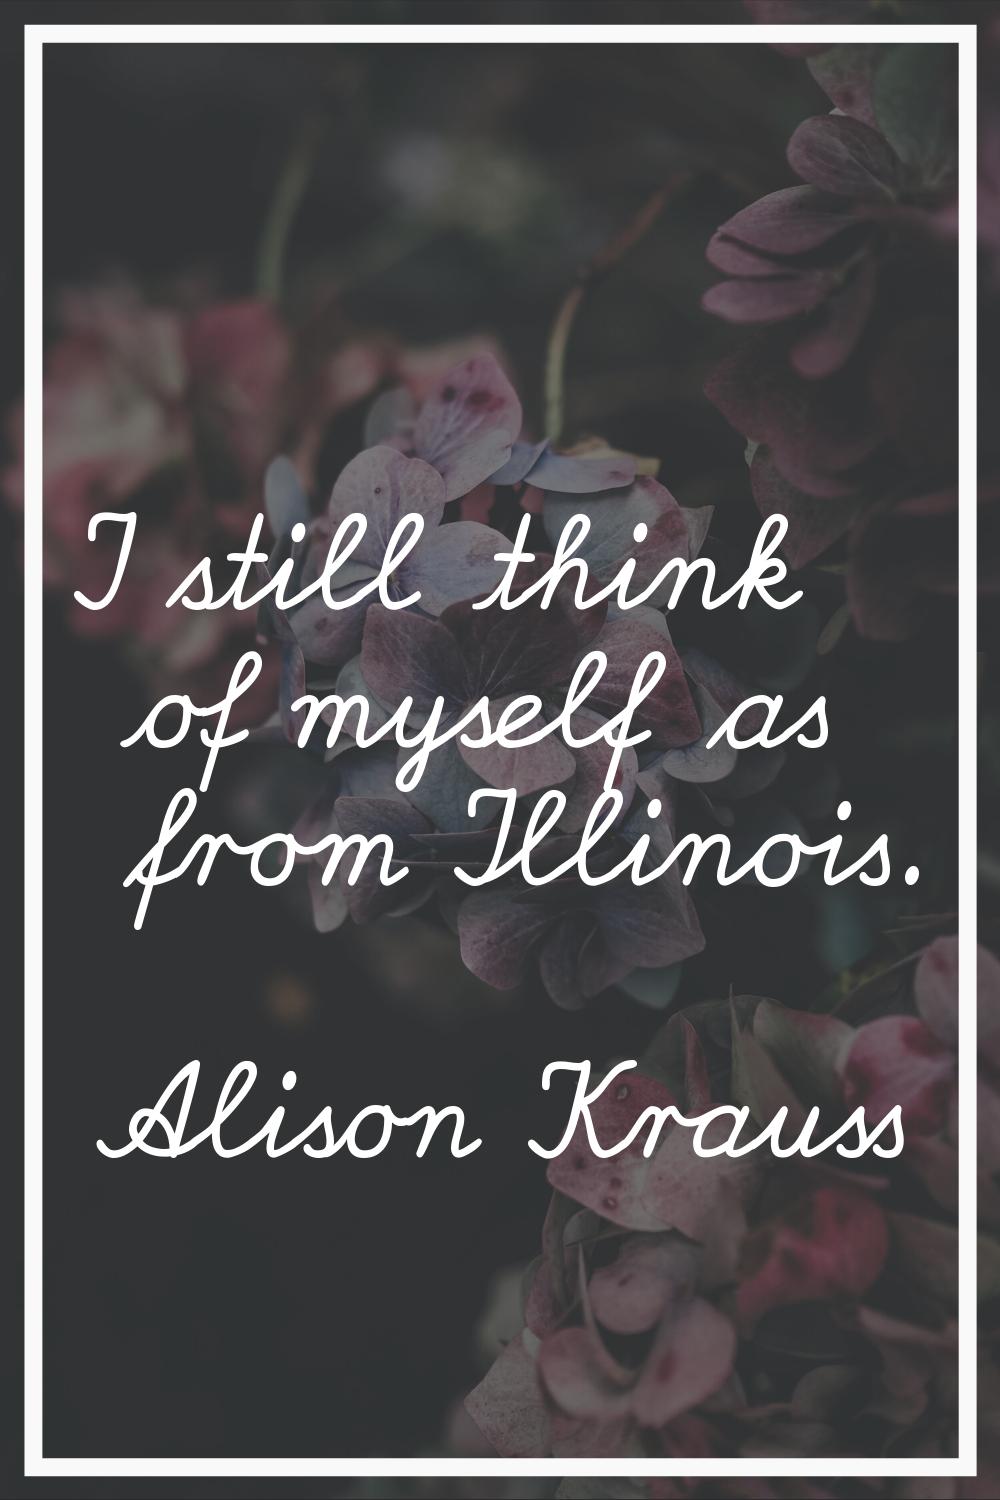 I still think of myself as from Illinois.